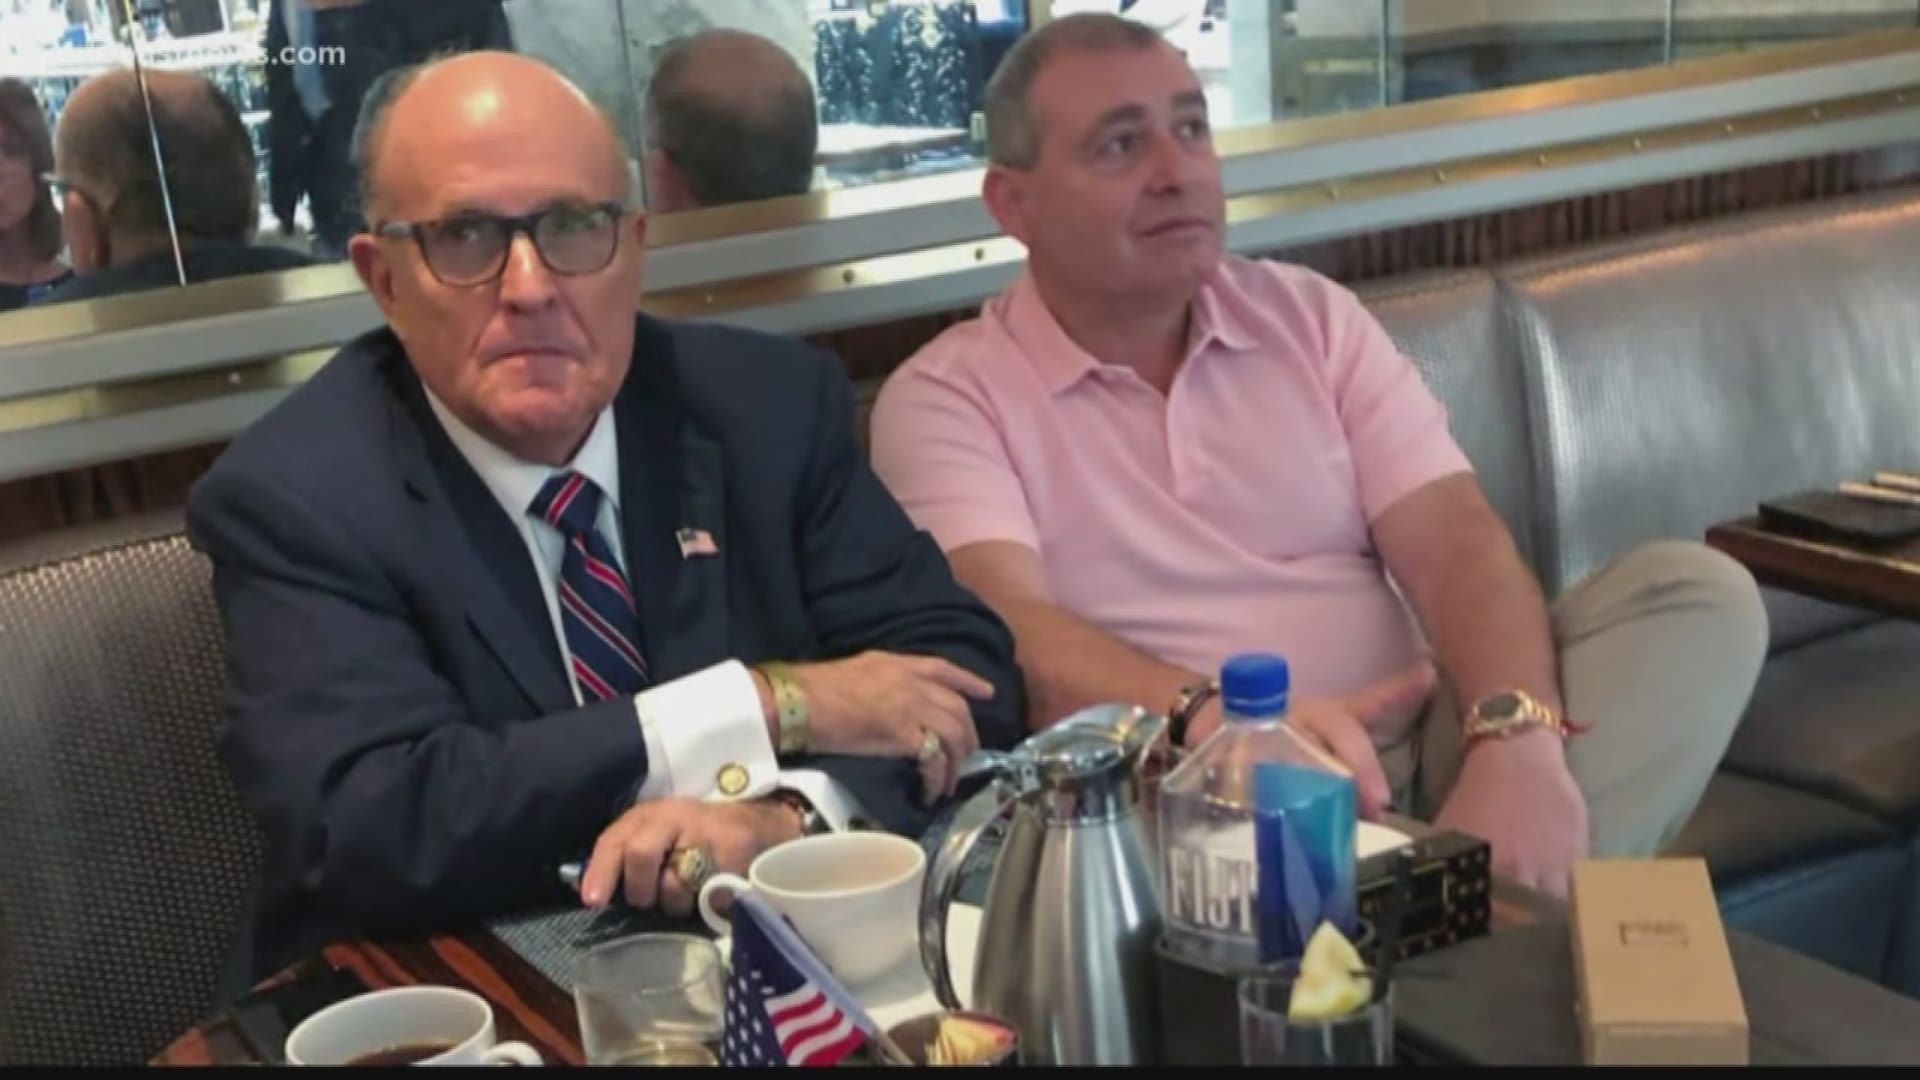 The men, who work for President Trump’s attorney Rudy Giuliani, gave more than $400,000 to Republican candidates in Florida.